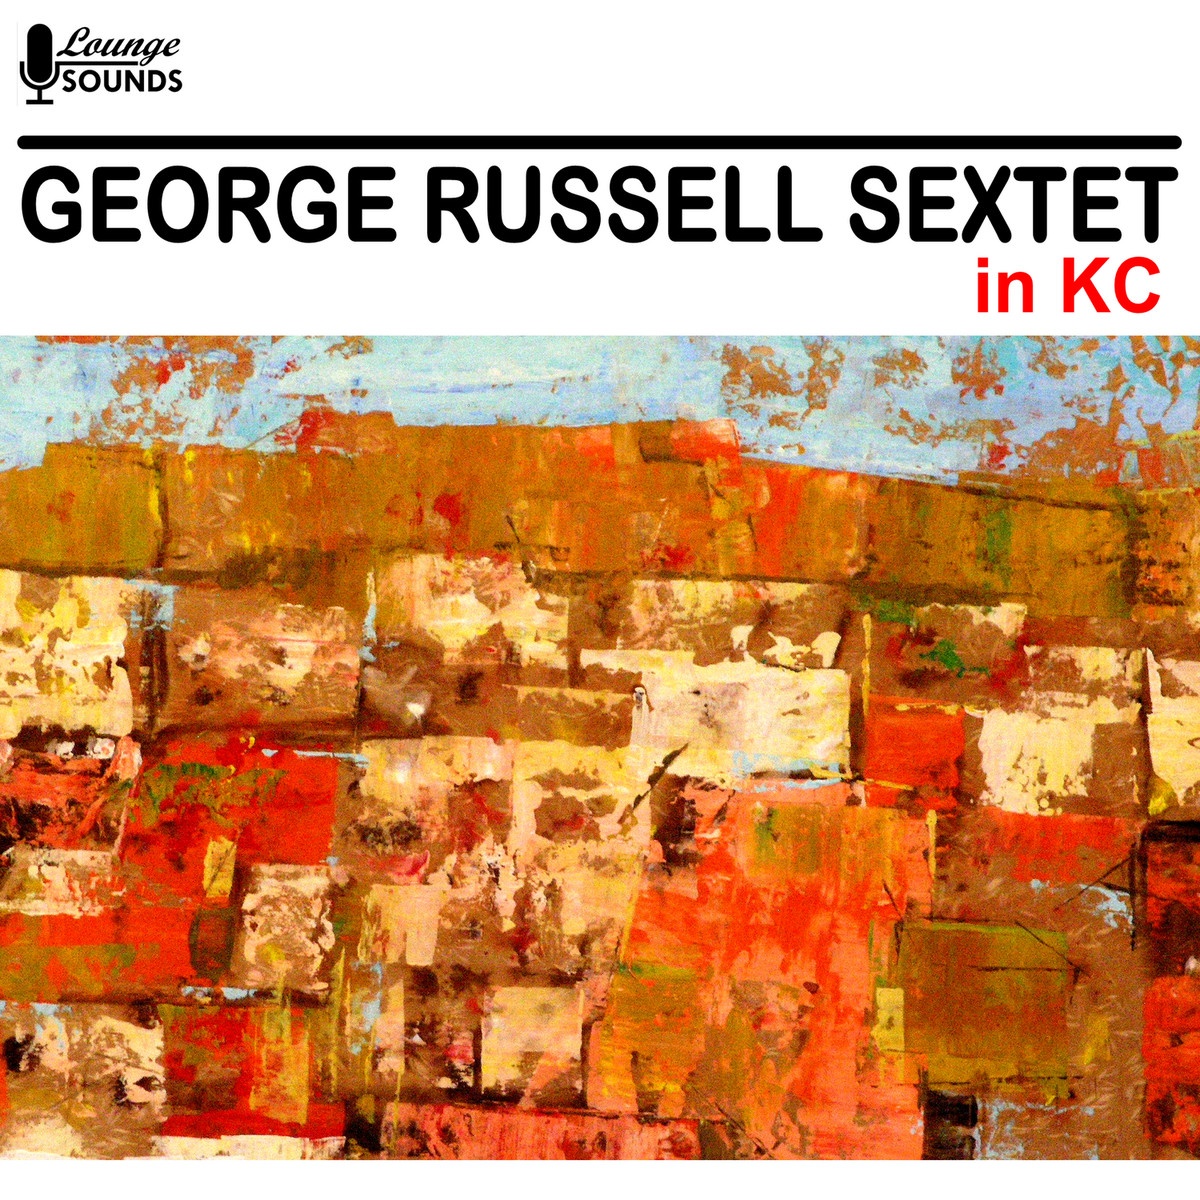 George Russell Sextet in KC